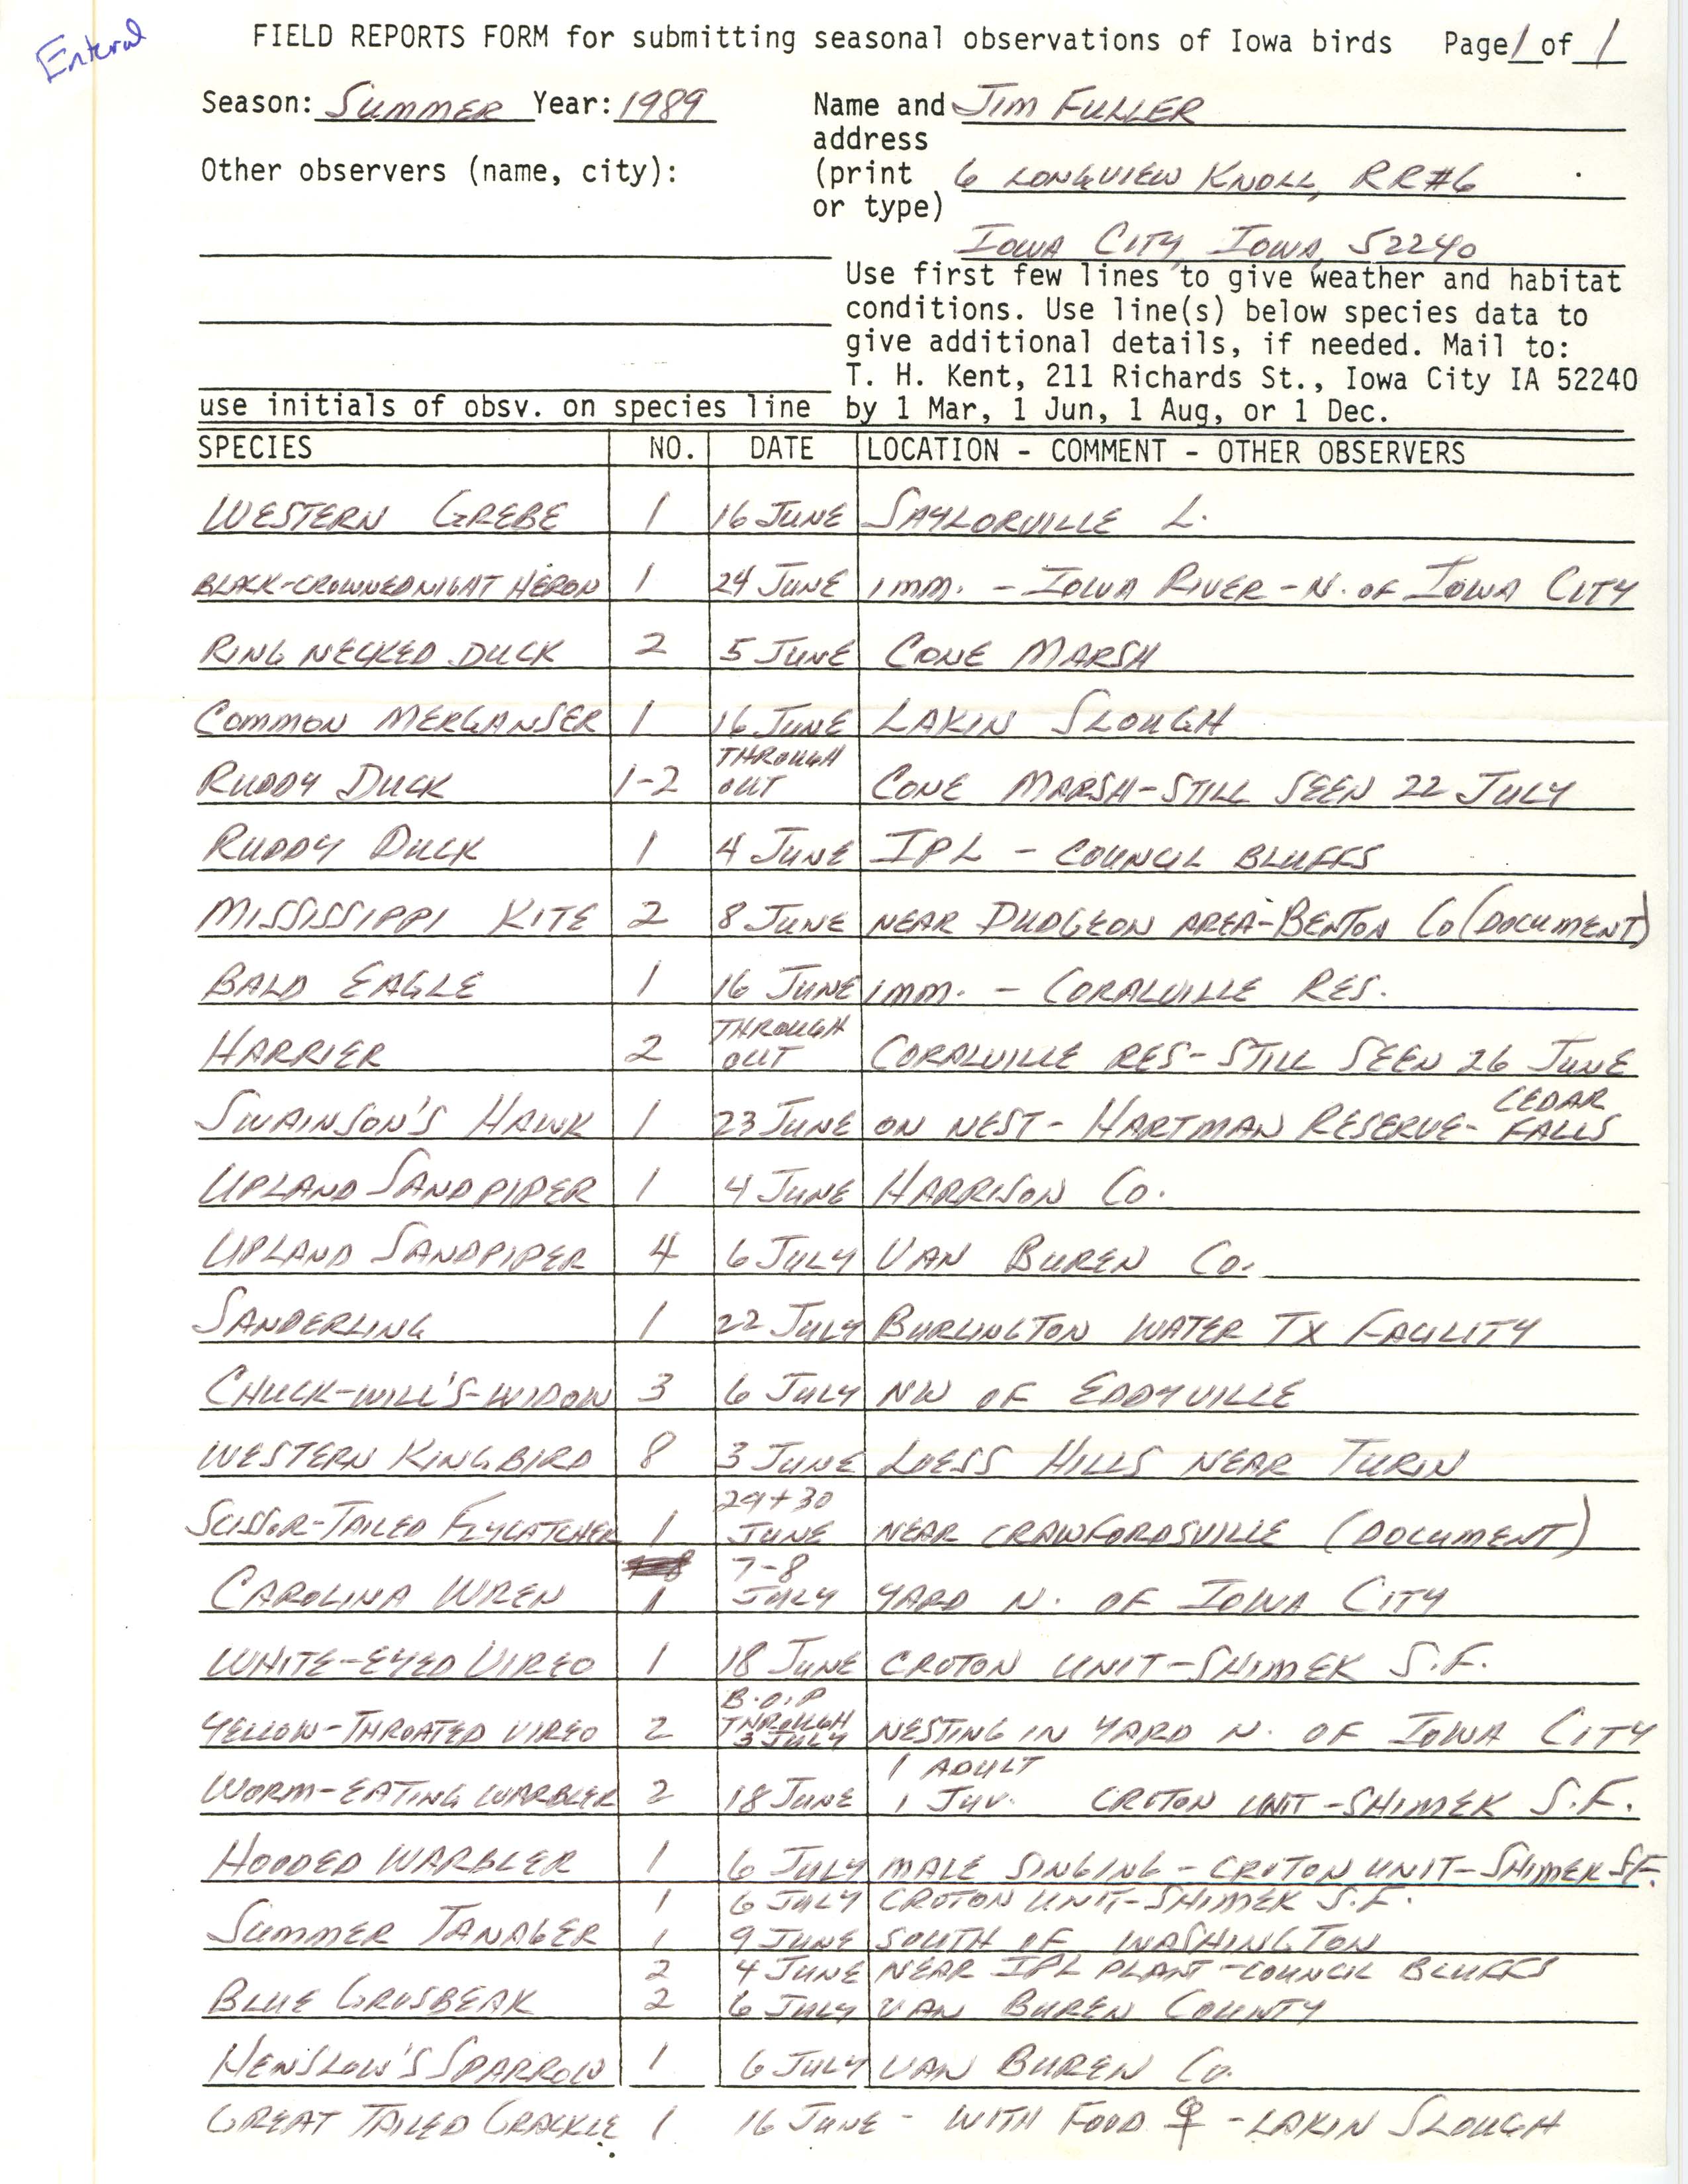 Field reports form for submitting seasonal observations of Iowa birds, James L. Fuller, summer 1989